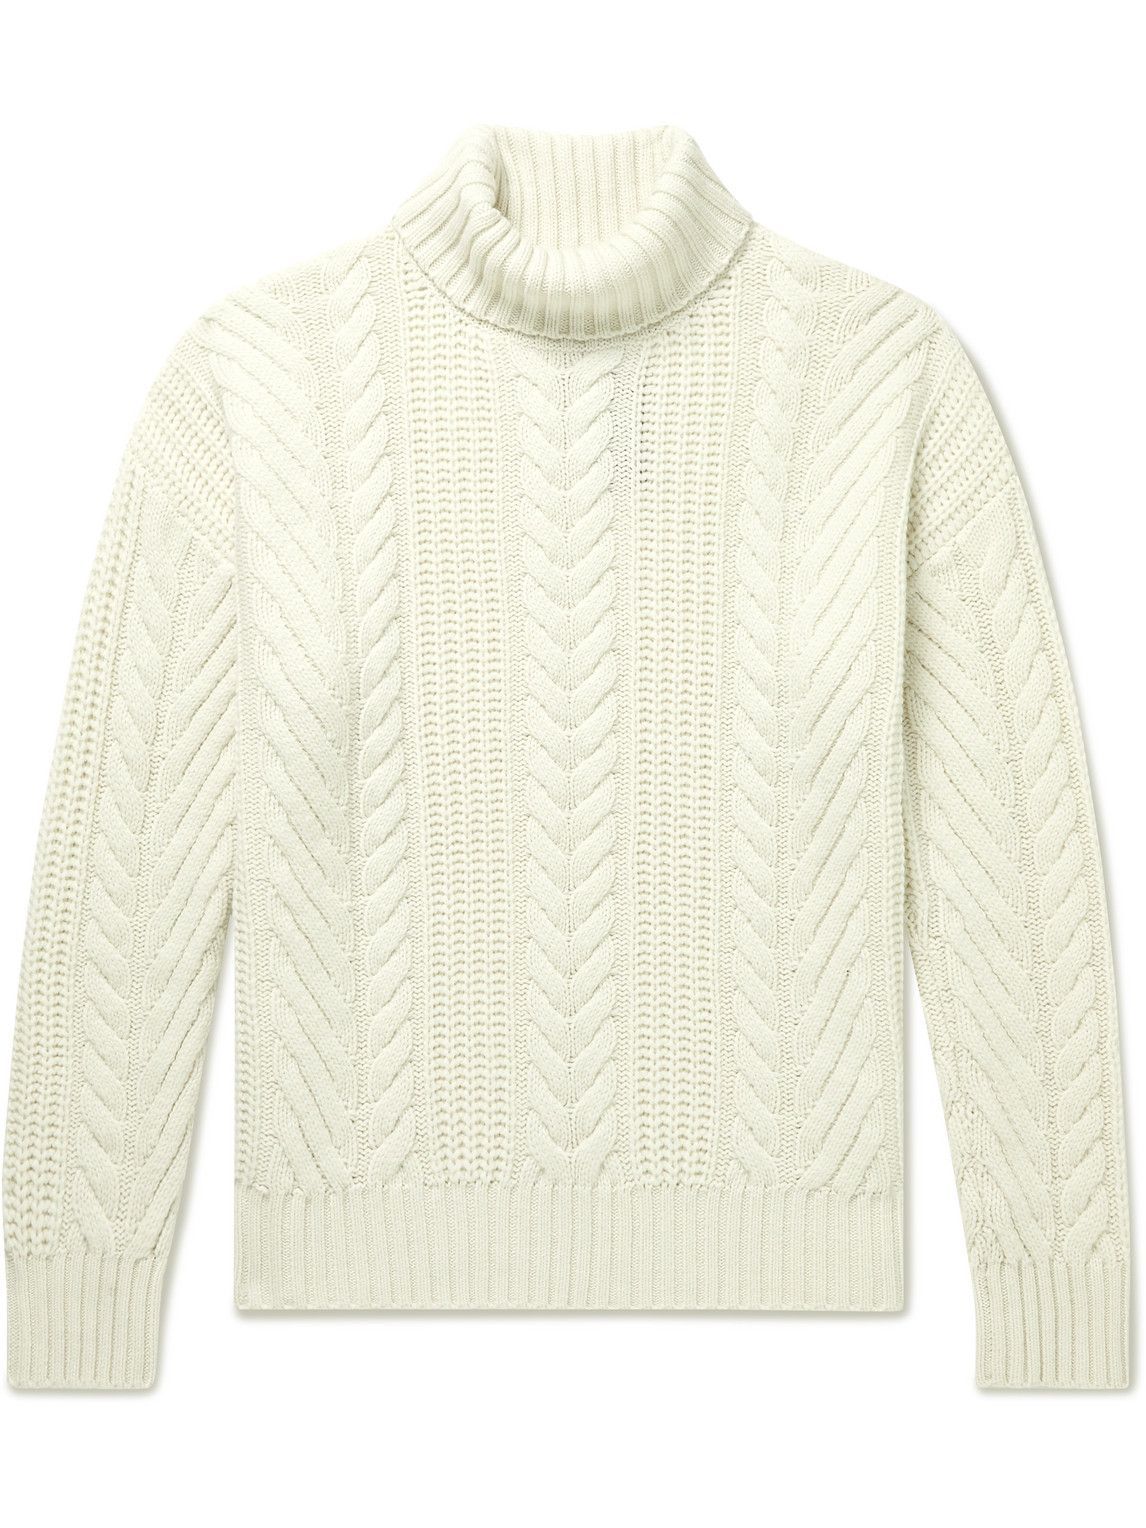 Hugo Boss - Nannos Cable-Knit Virgin Wool Rollneck Sweater - White Hugo ...